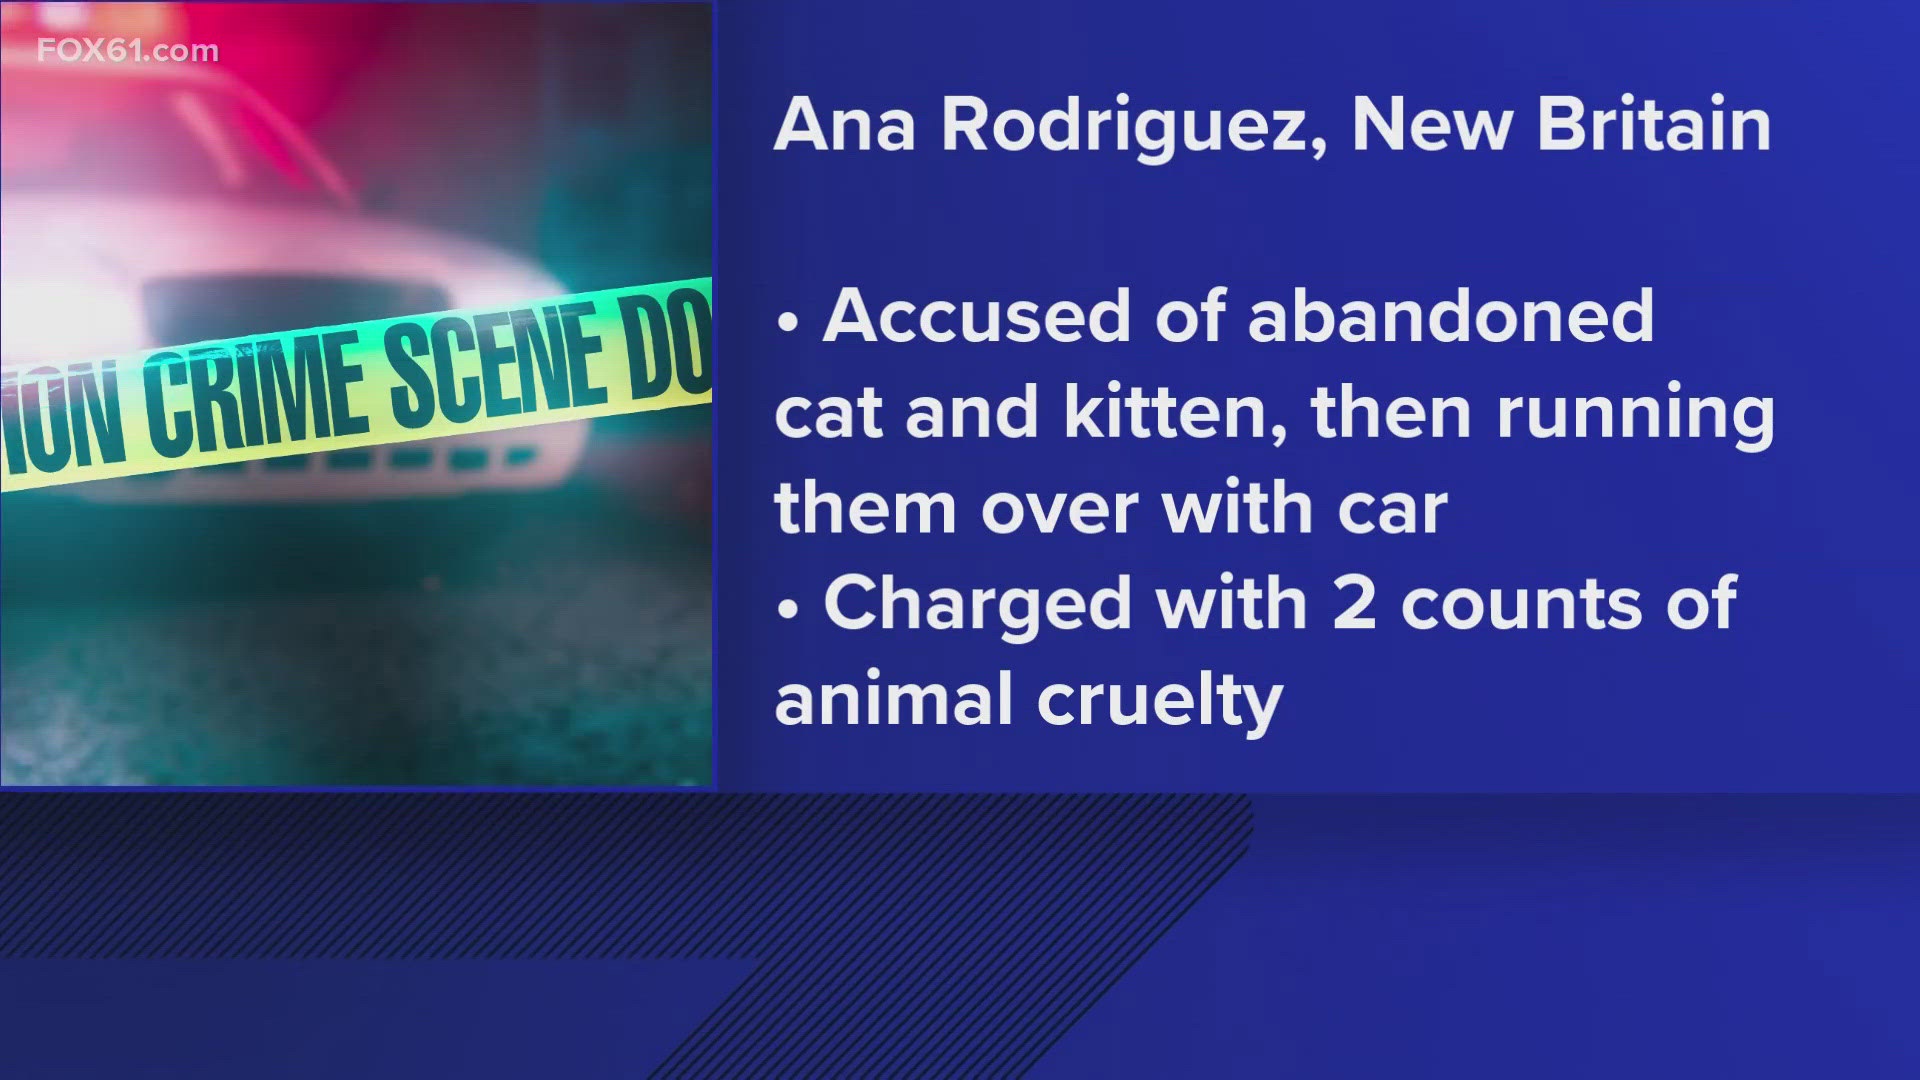 The woman allegedly discarded the cat and kitten in the parking lot and then ran over the kitten while backing out her vehicle. She then fled the scene.